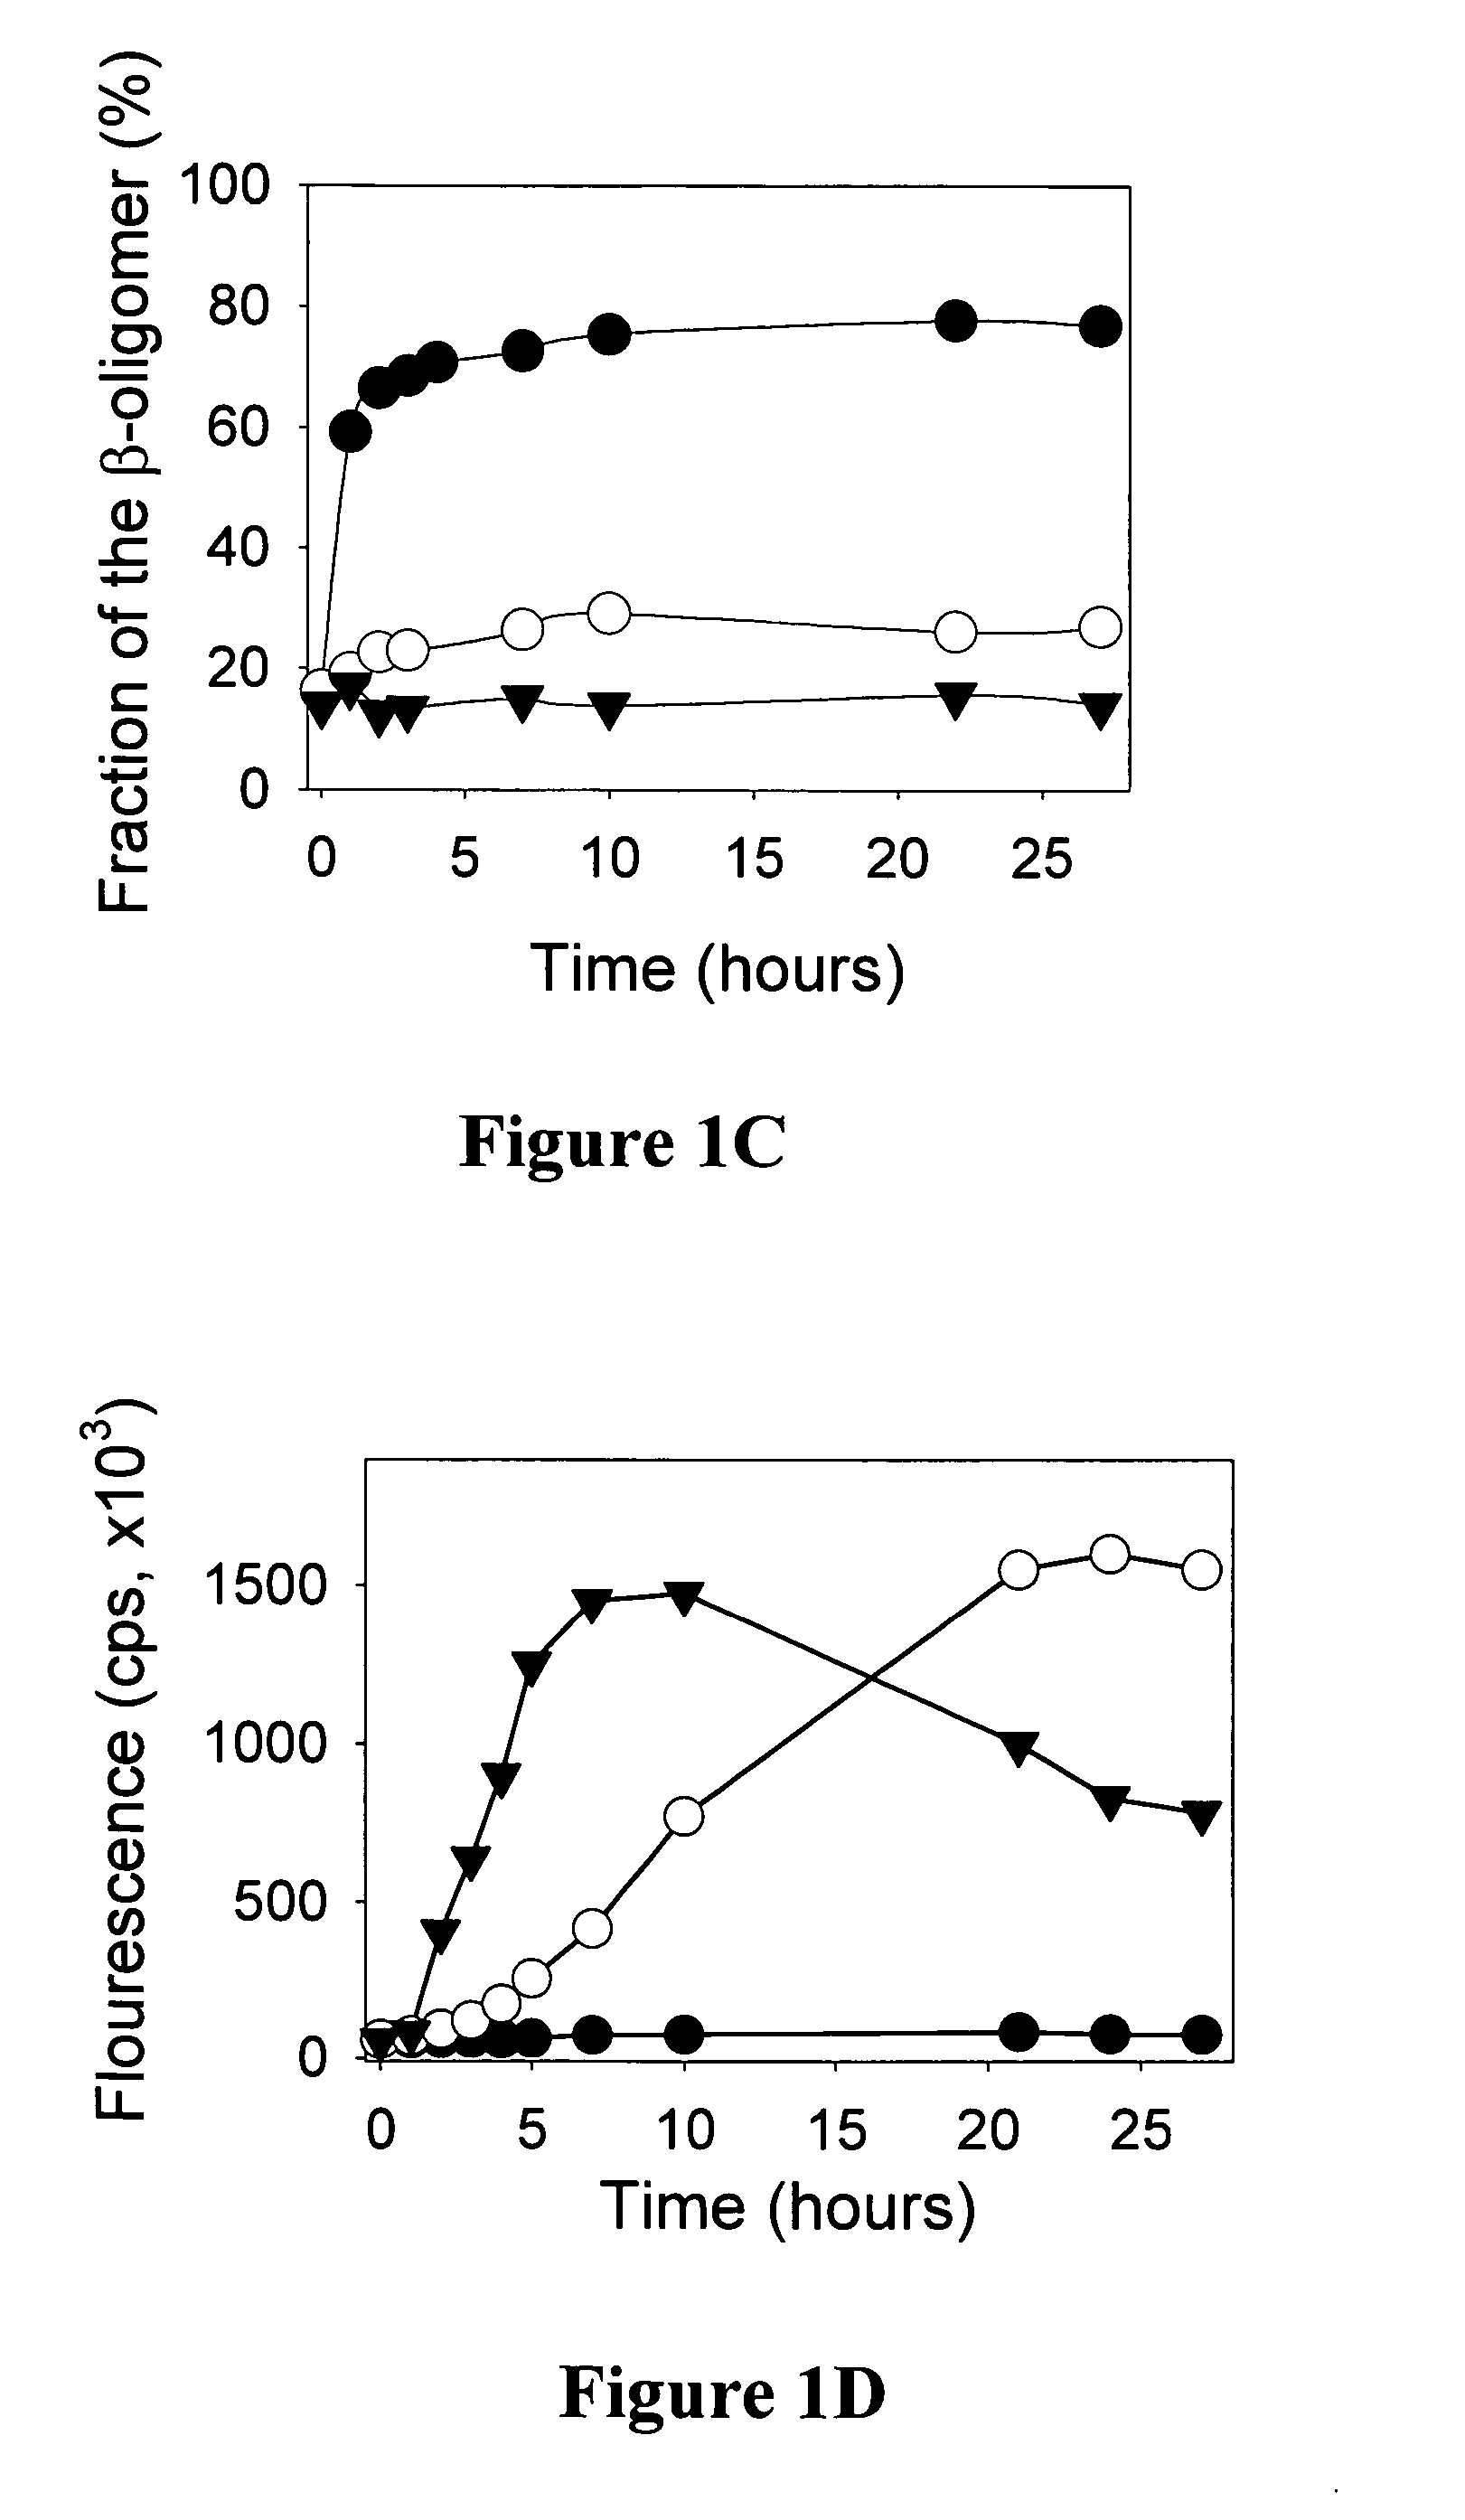 Composition and method for monitoring in vitro conversion of full -length mammalian prion protein to amyloid form with physical properties of PRPsc